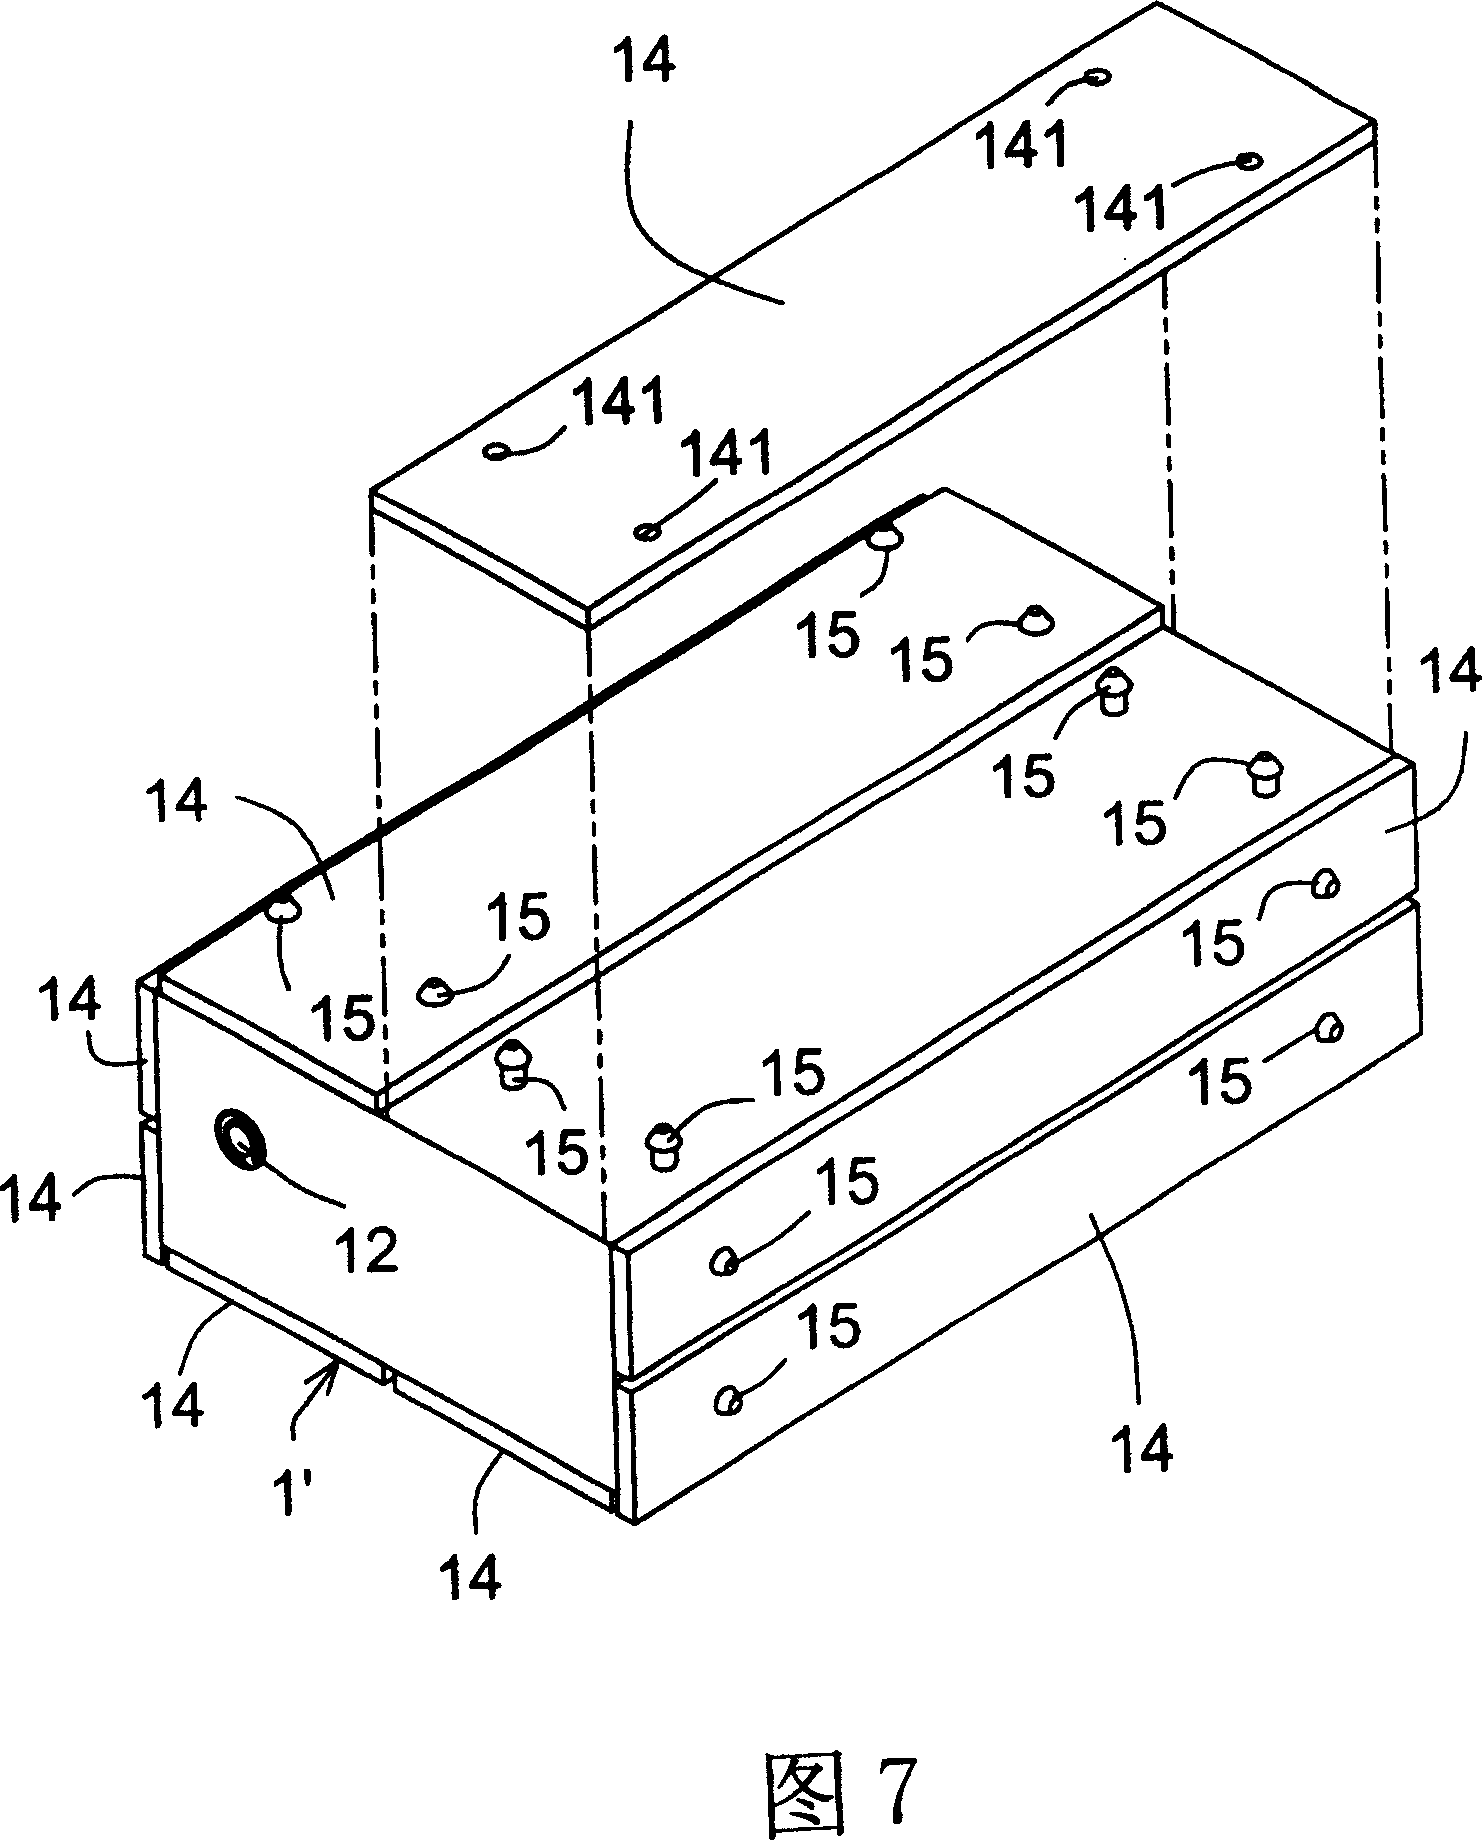 Construction cavities forming method and object containing cavities fabricated thereby